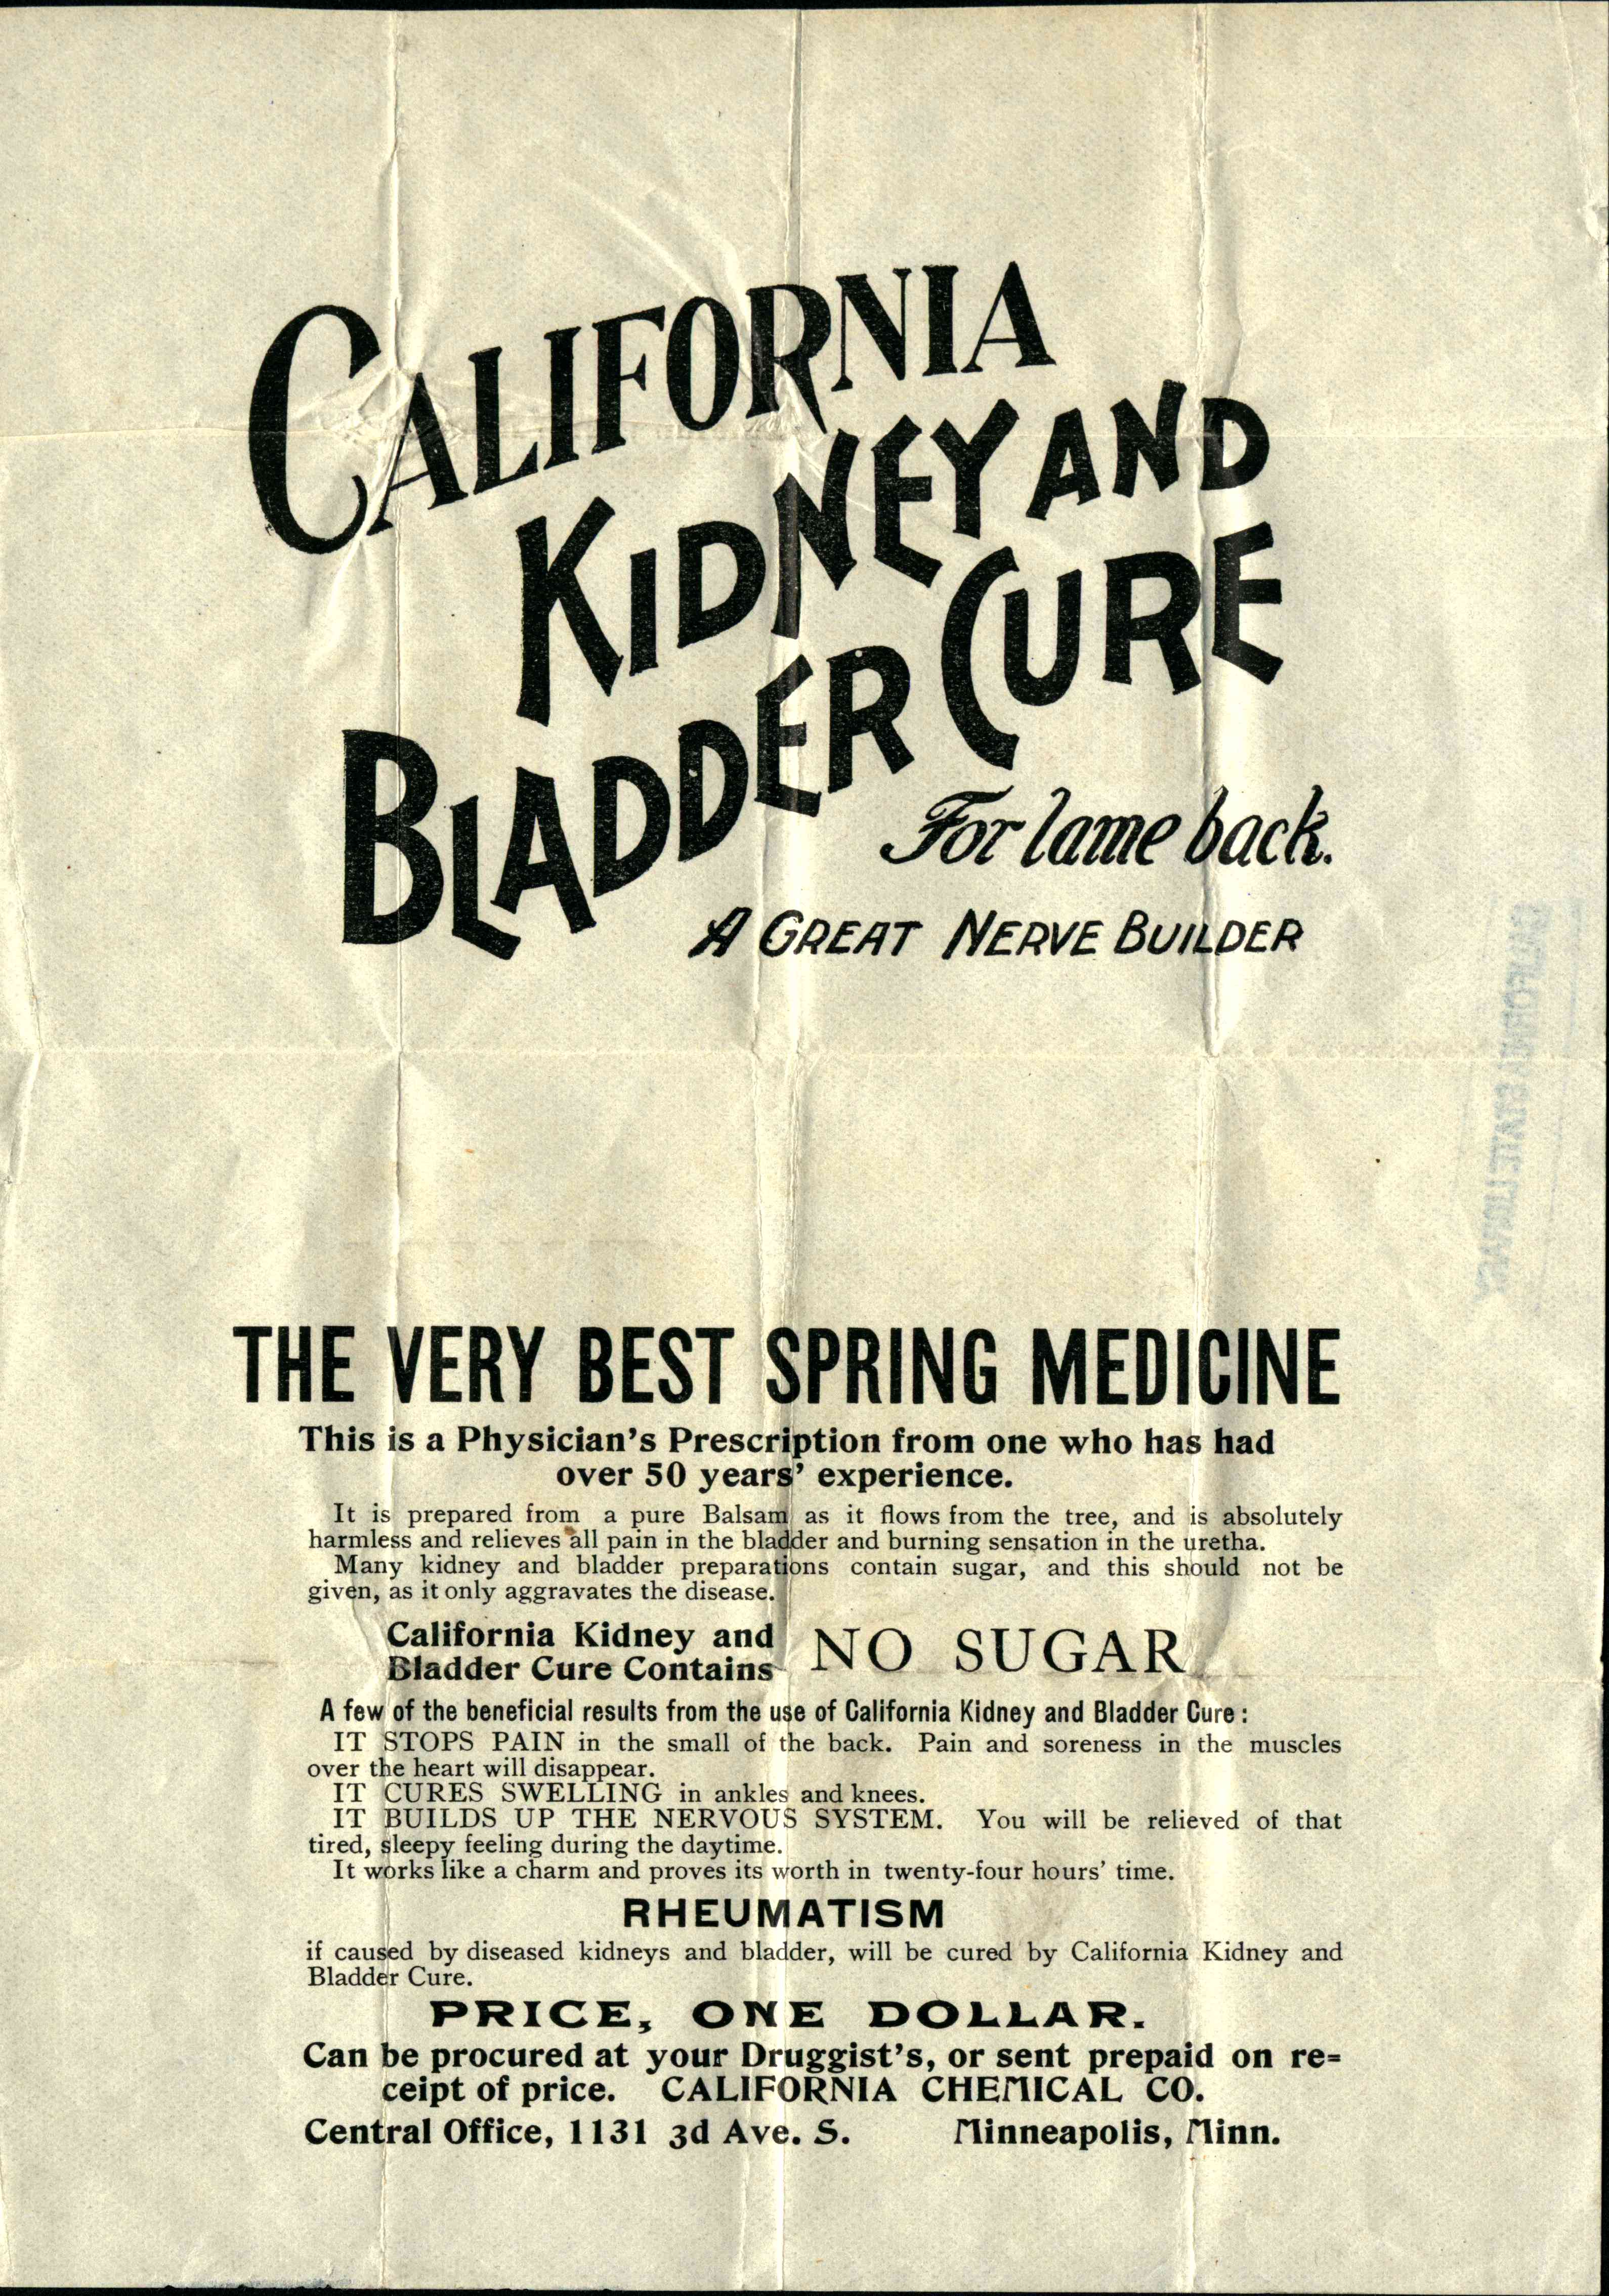 Original text includes: 'For lame back. A great nerve builder/ the very best spring medicine. No sugar.